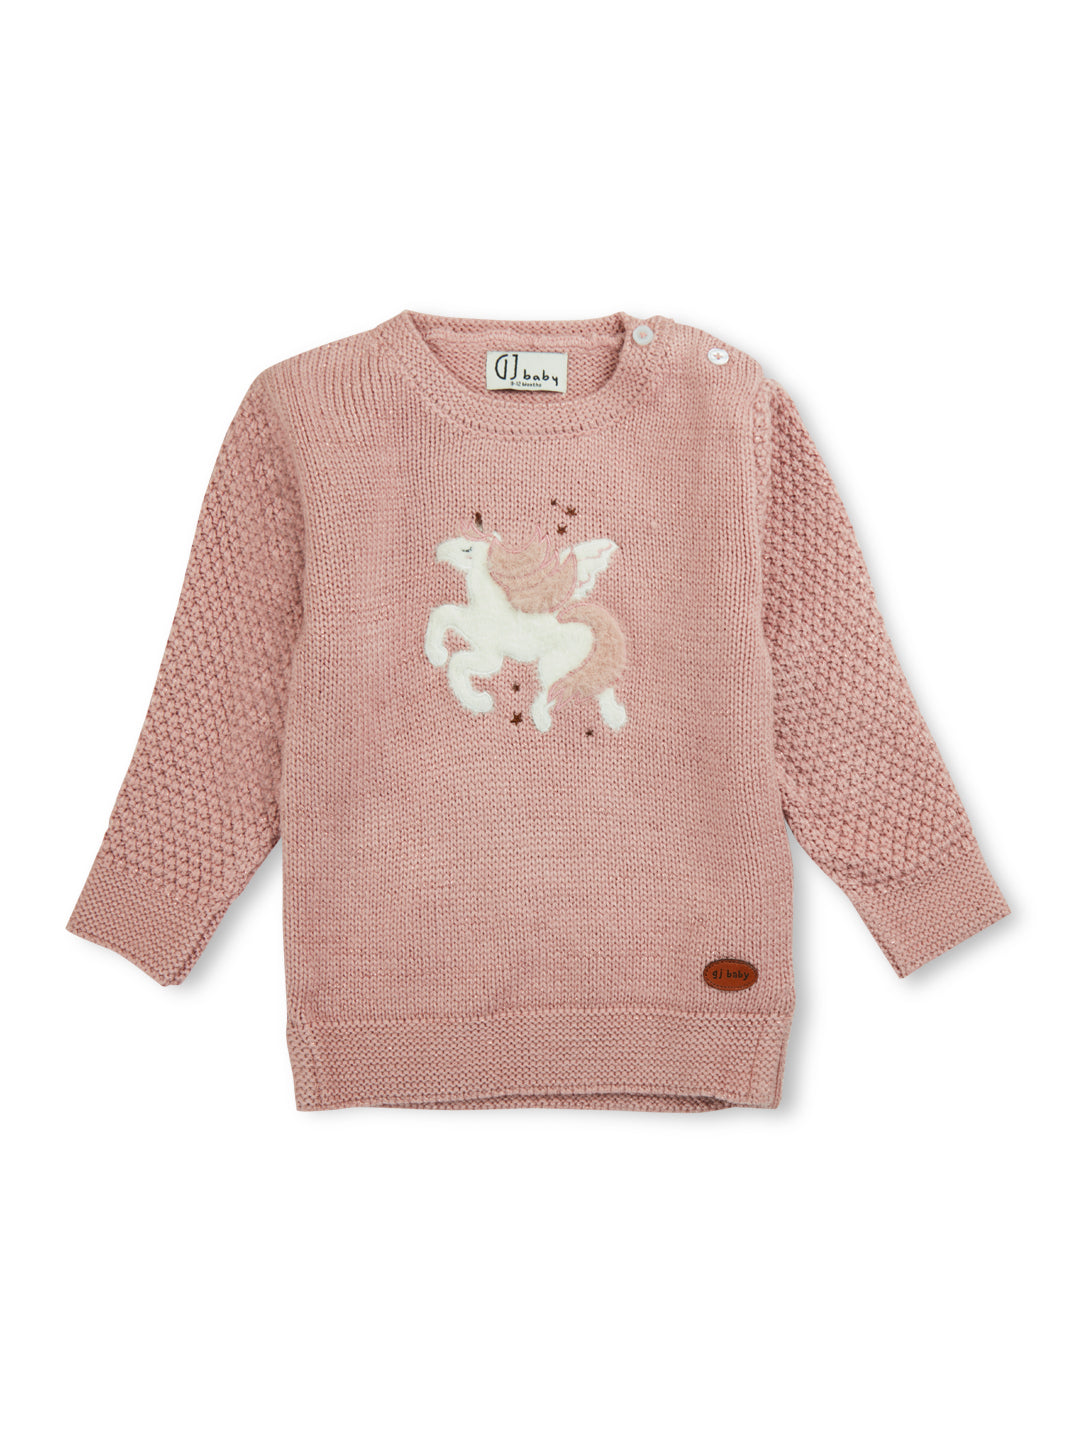 Girls Pink Applique Cotton Full Sleeves Sweater